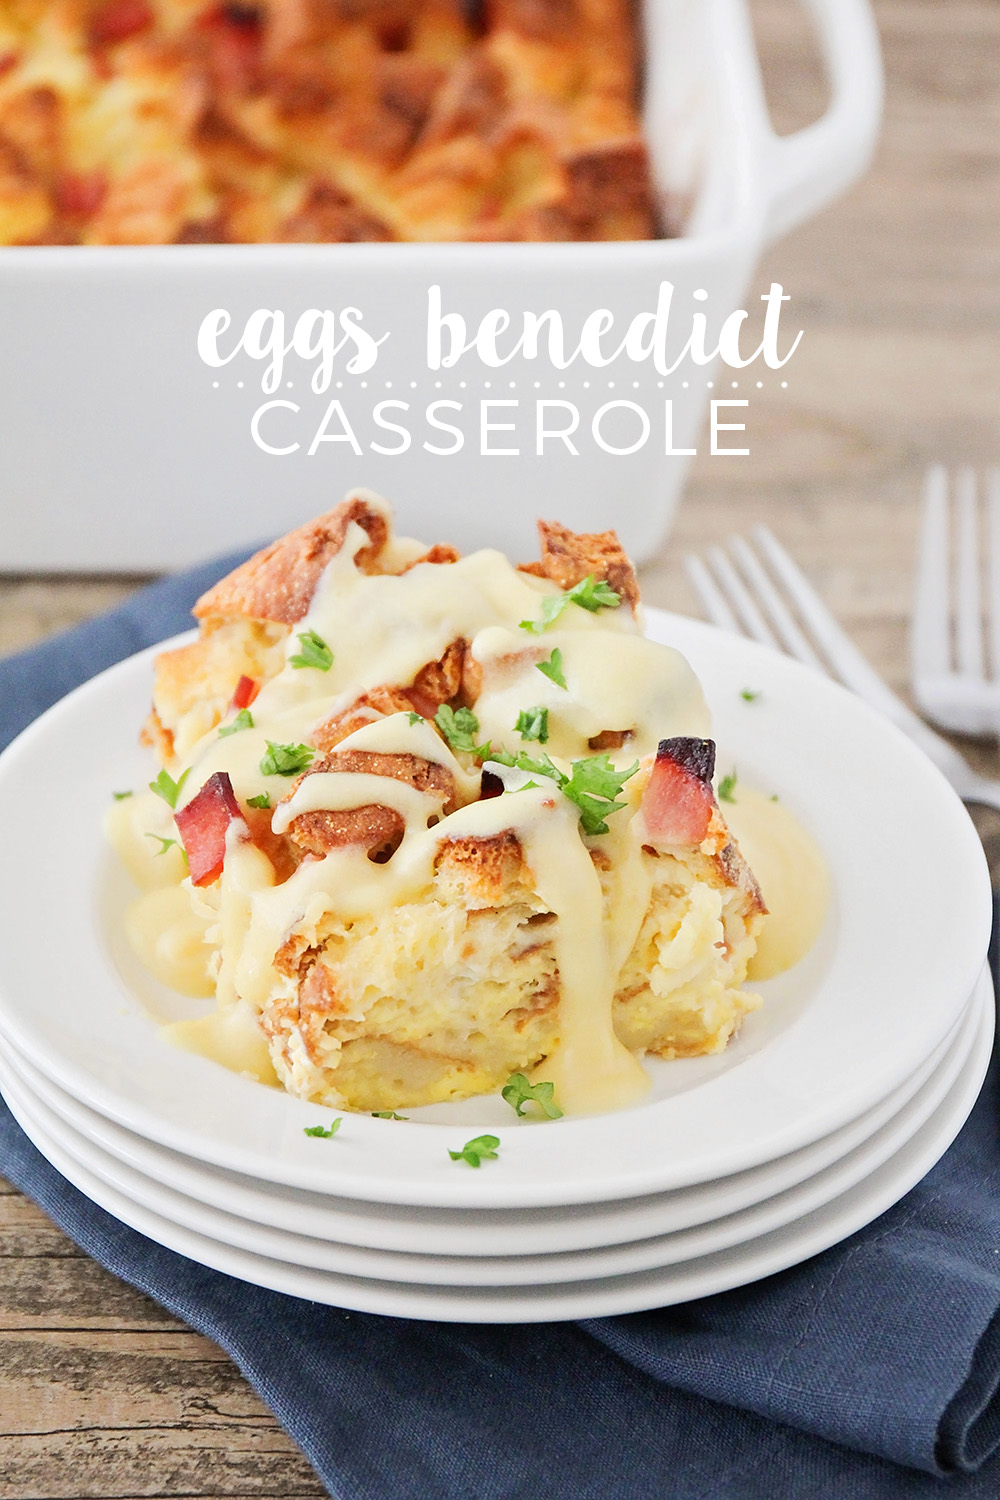 This delicious and savory eggs benedict casserole is the perfect special occasion breakfast!